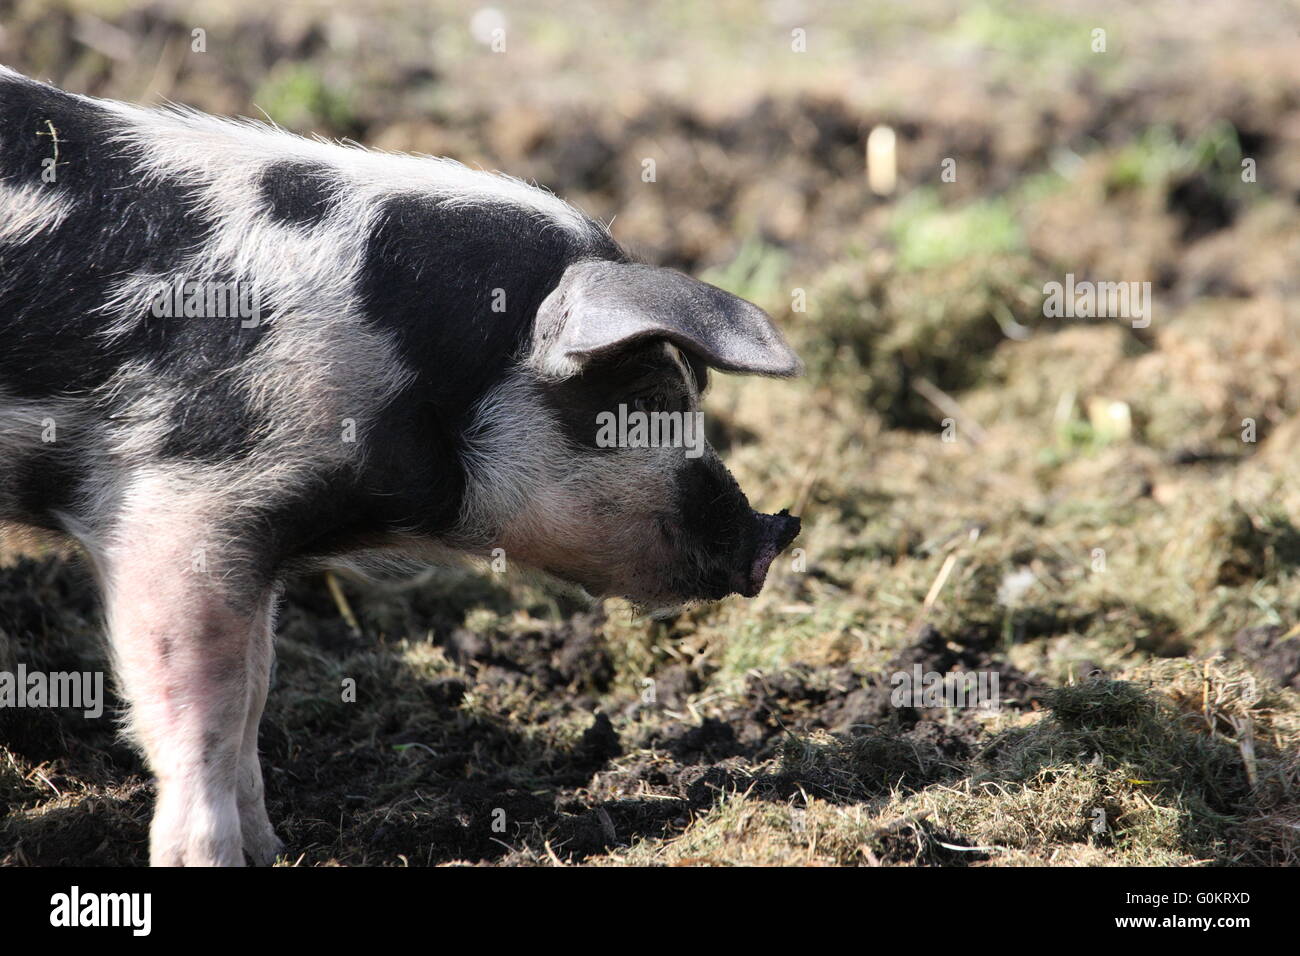 spotted weaner pig , outdoors, Stock Photo